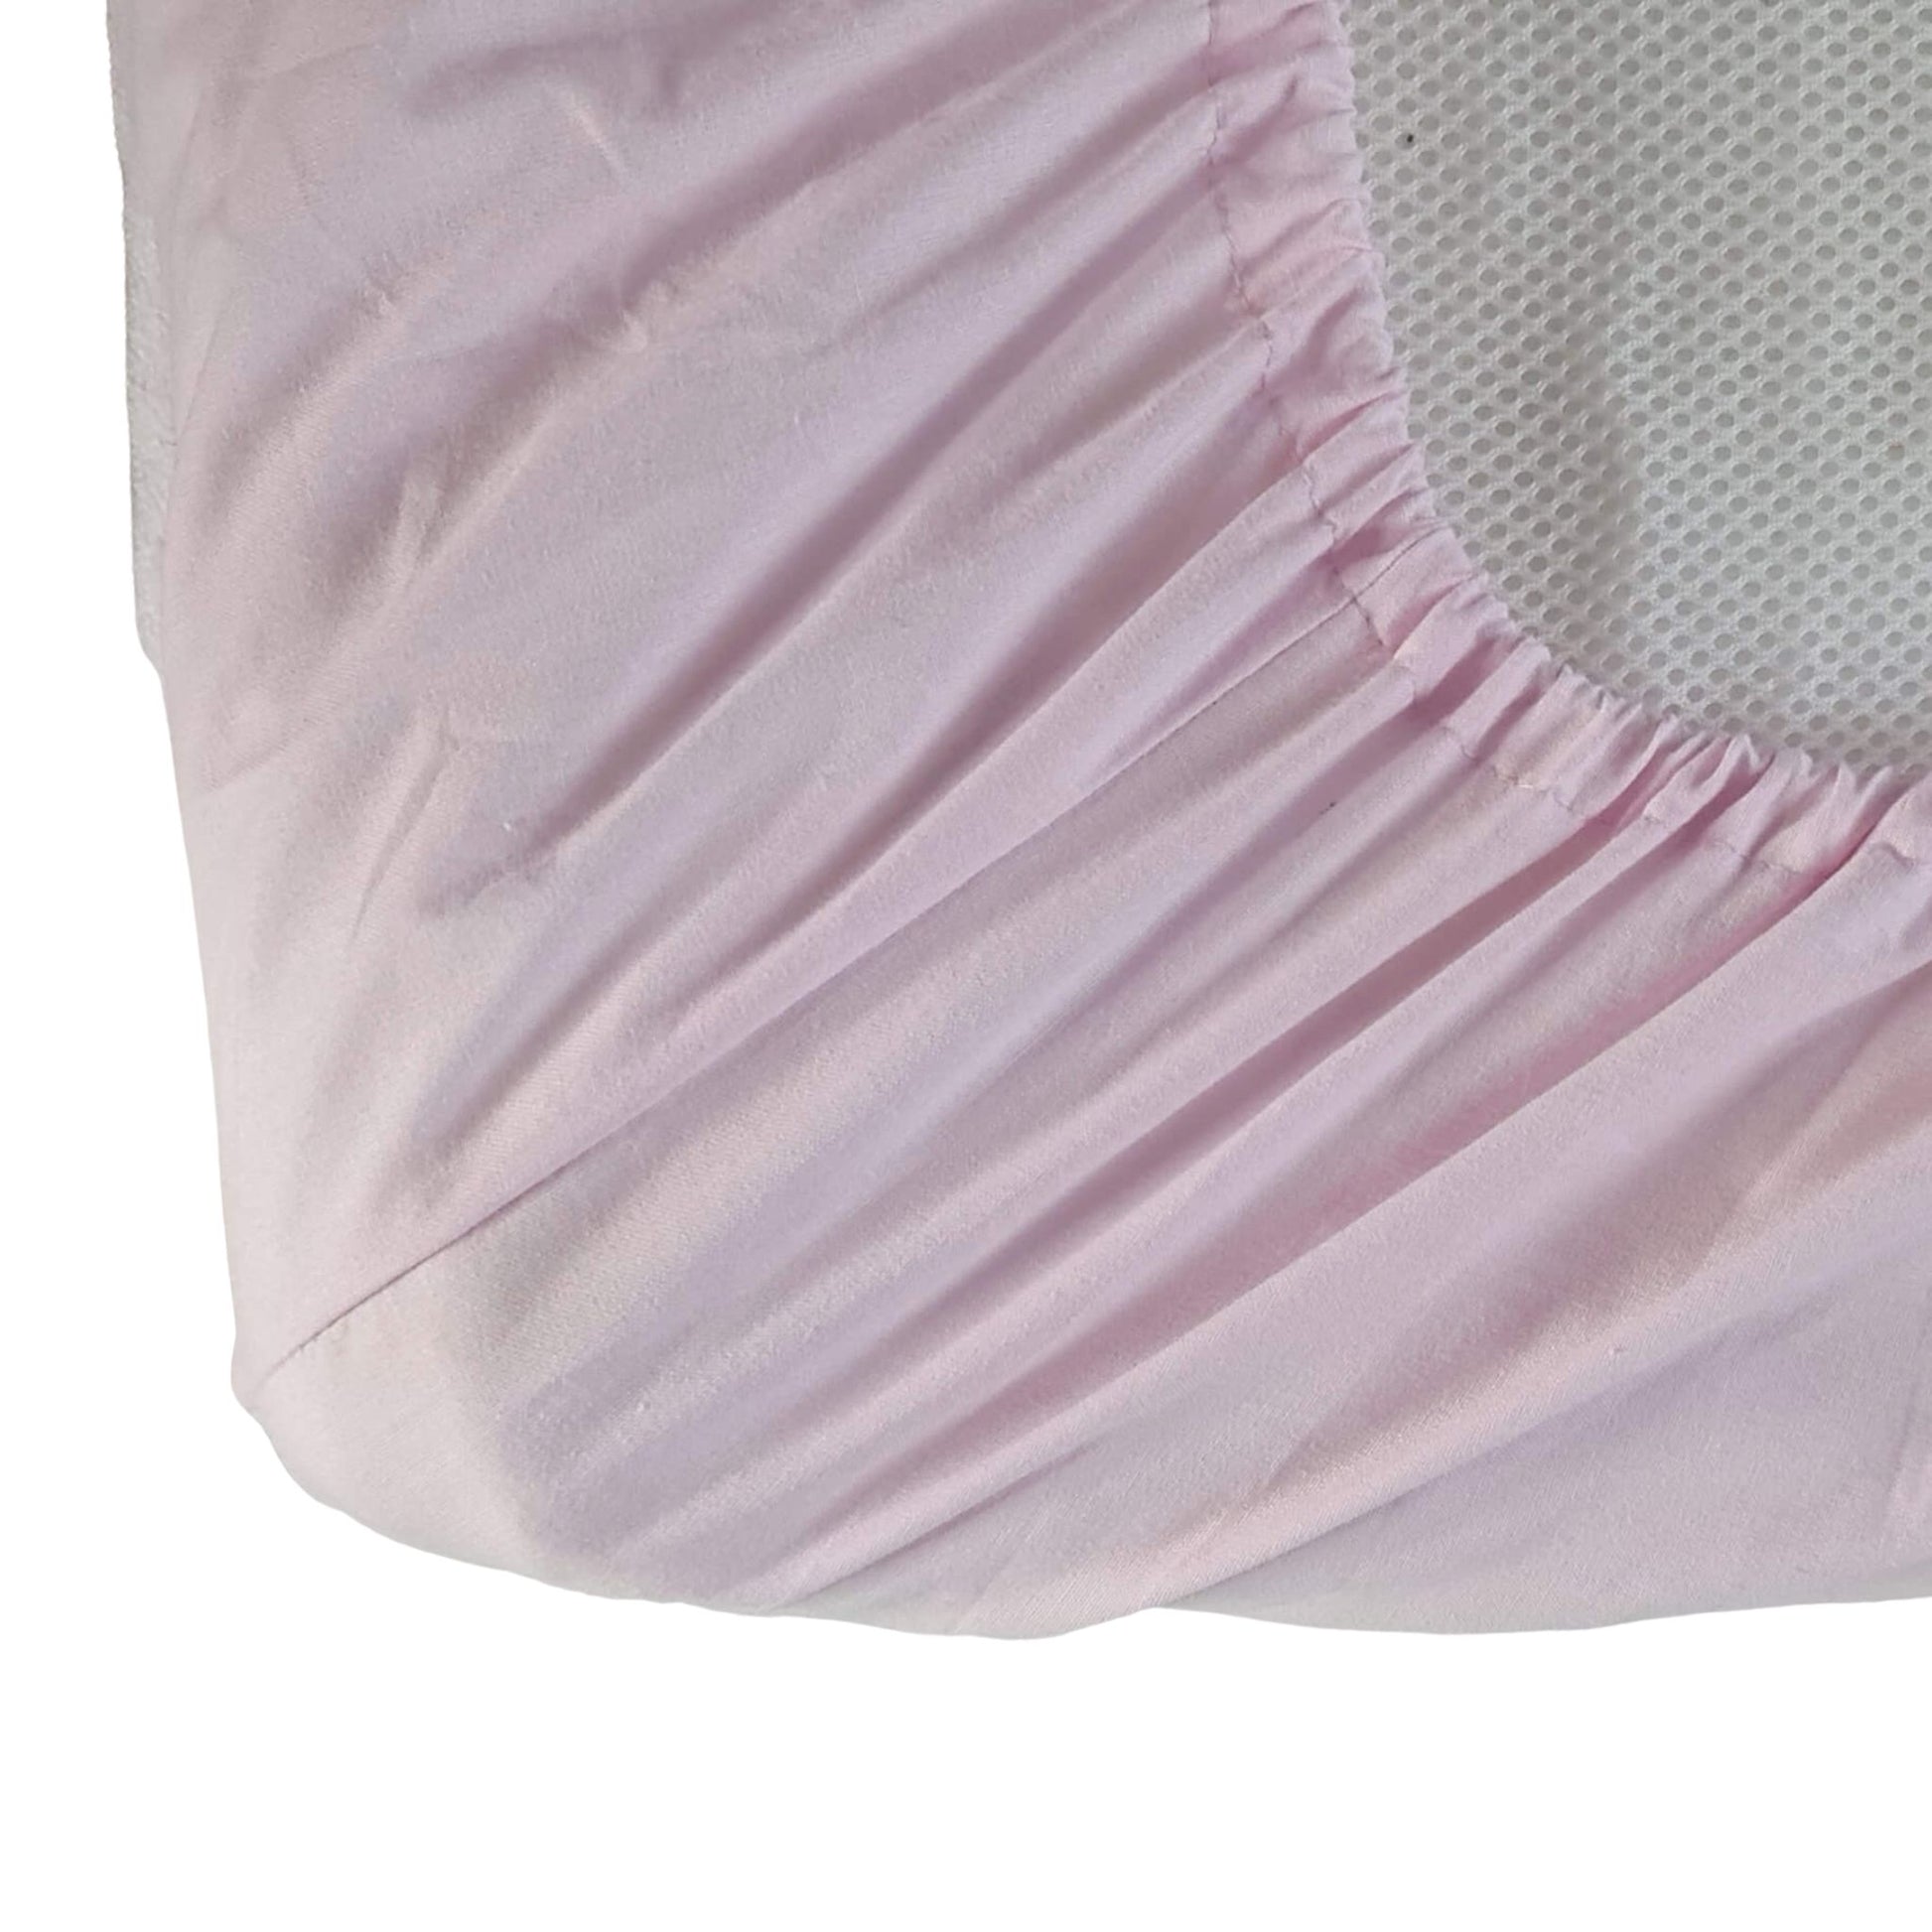 100% cotton pink sheet for baby cot bed